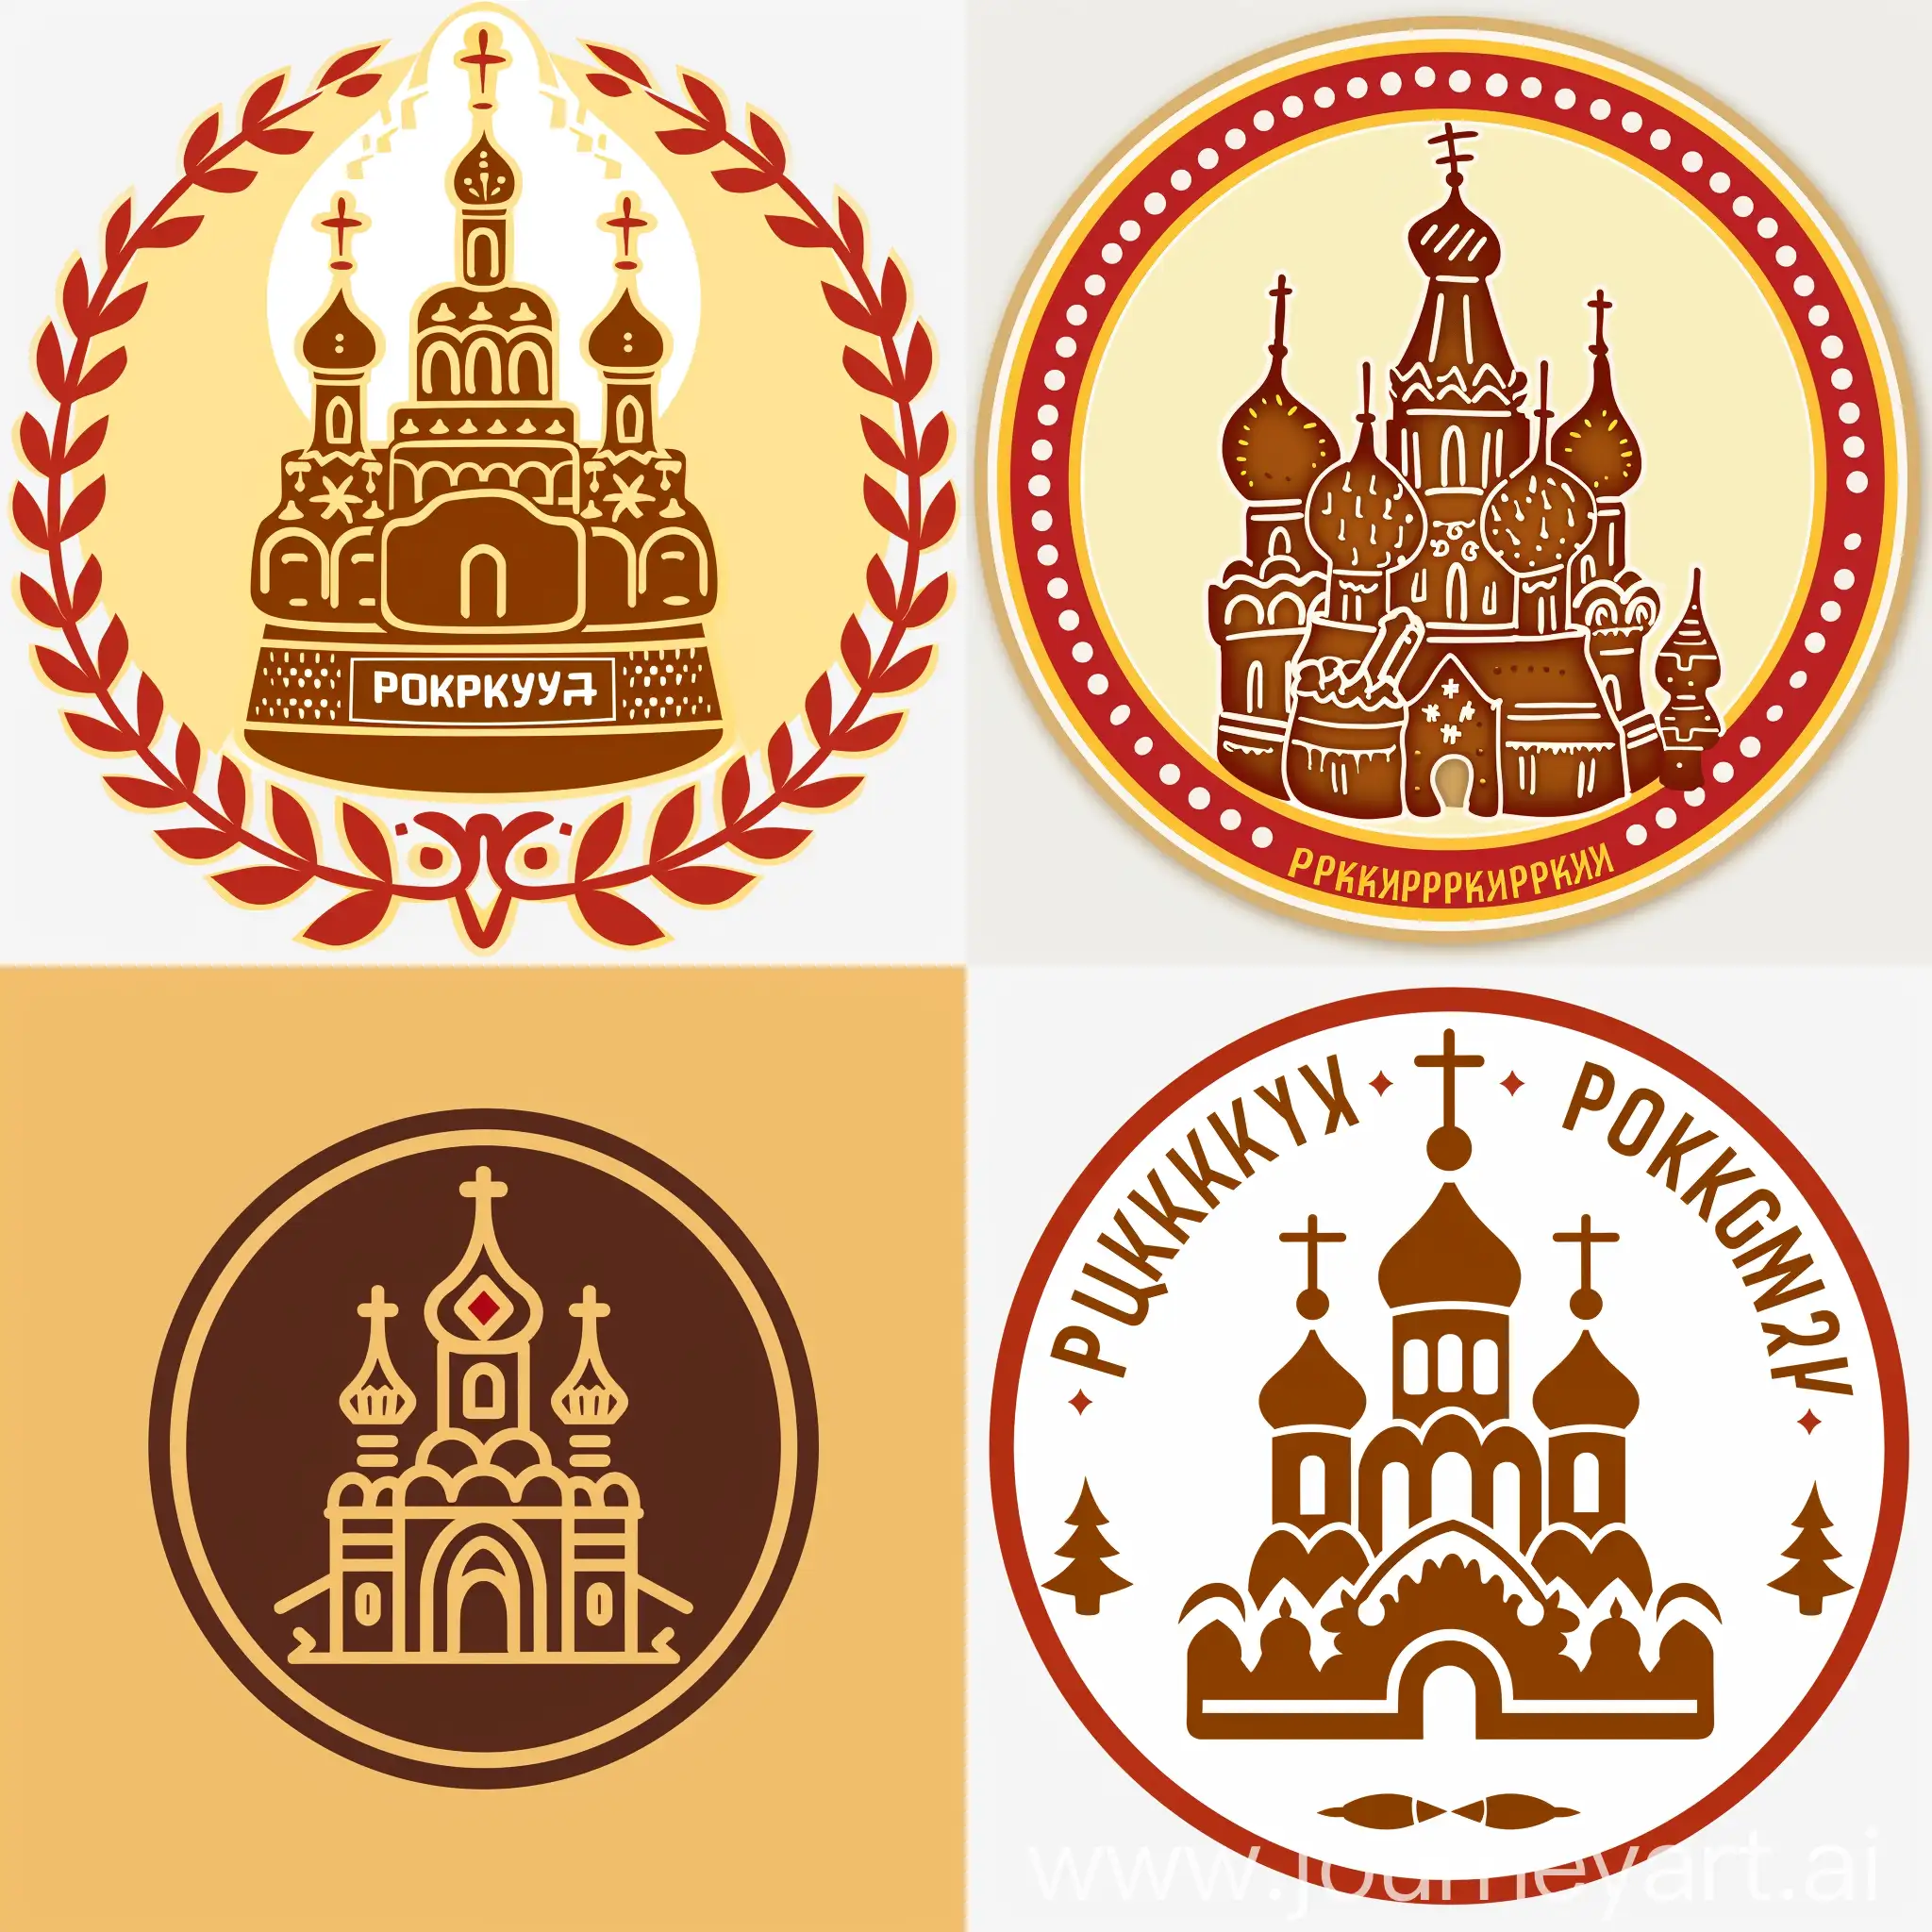 Colorful-Gingerbread-Museum-Logo-with-Pokrovsky-Style